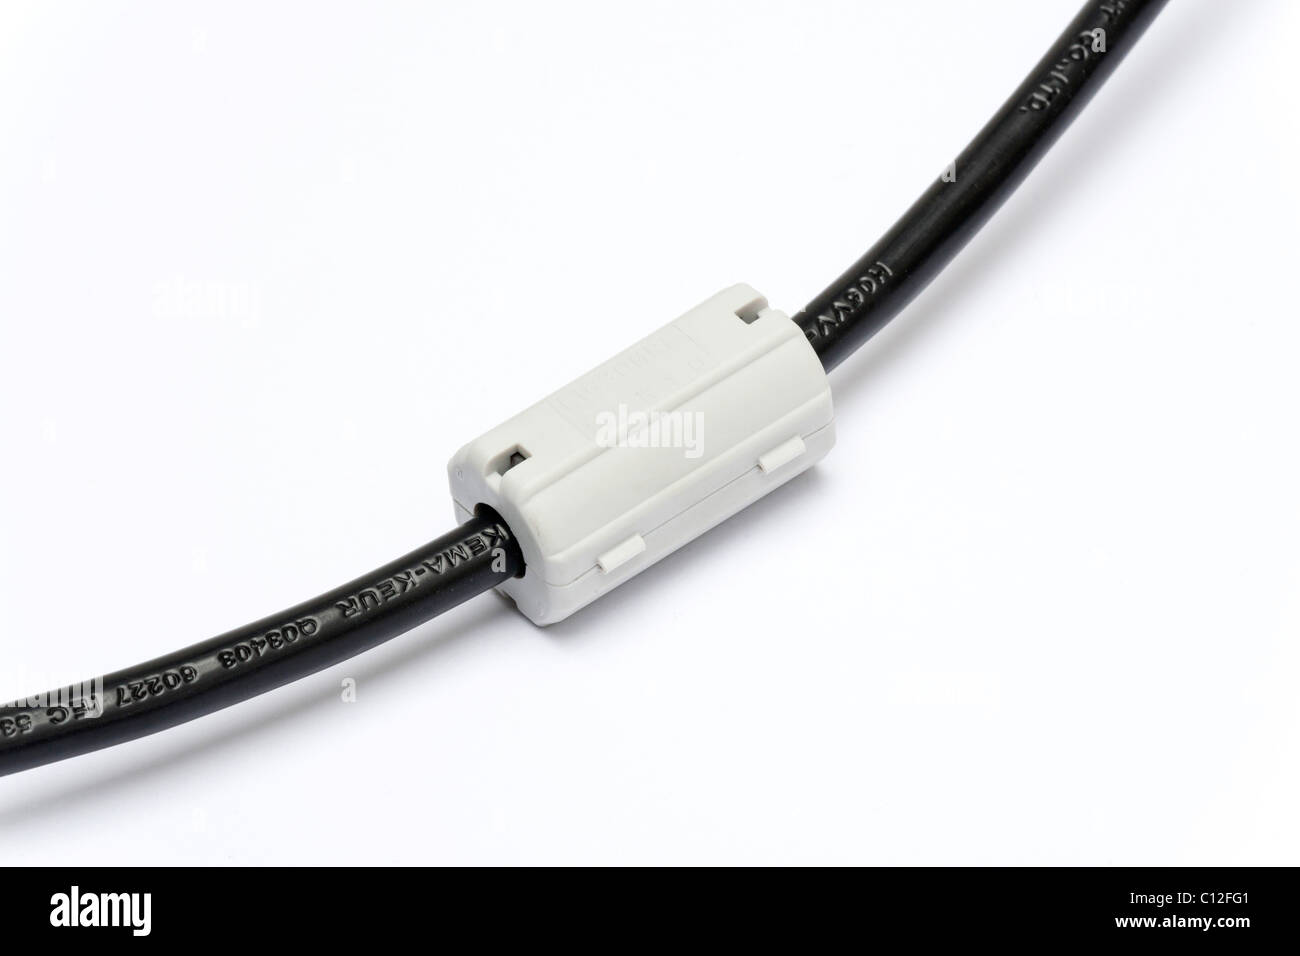 ferrite core interference filter on a cable Stock Photo